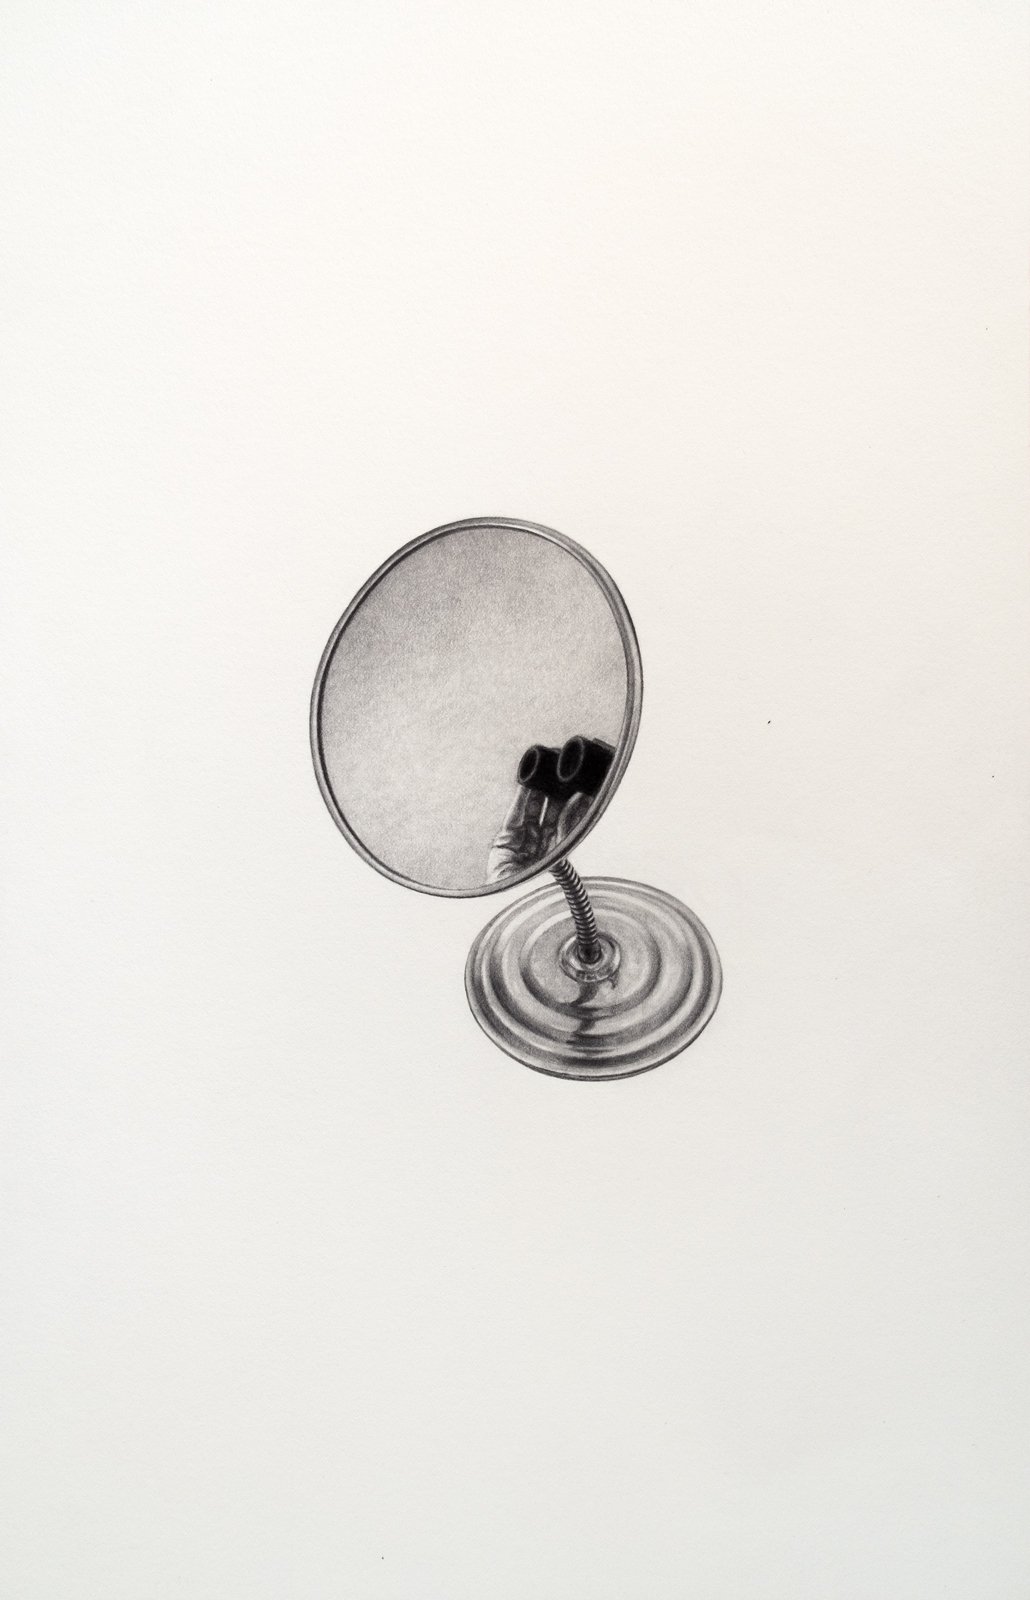 Looking at Someone Looking at Something - 11x17in, graphite on paper, 2021